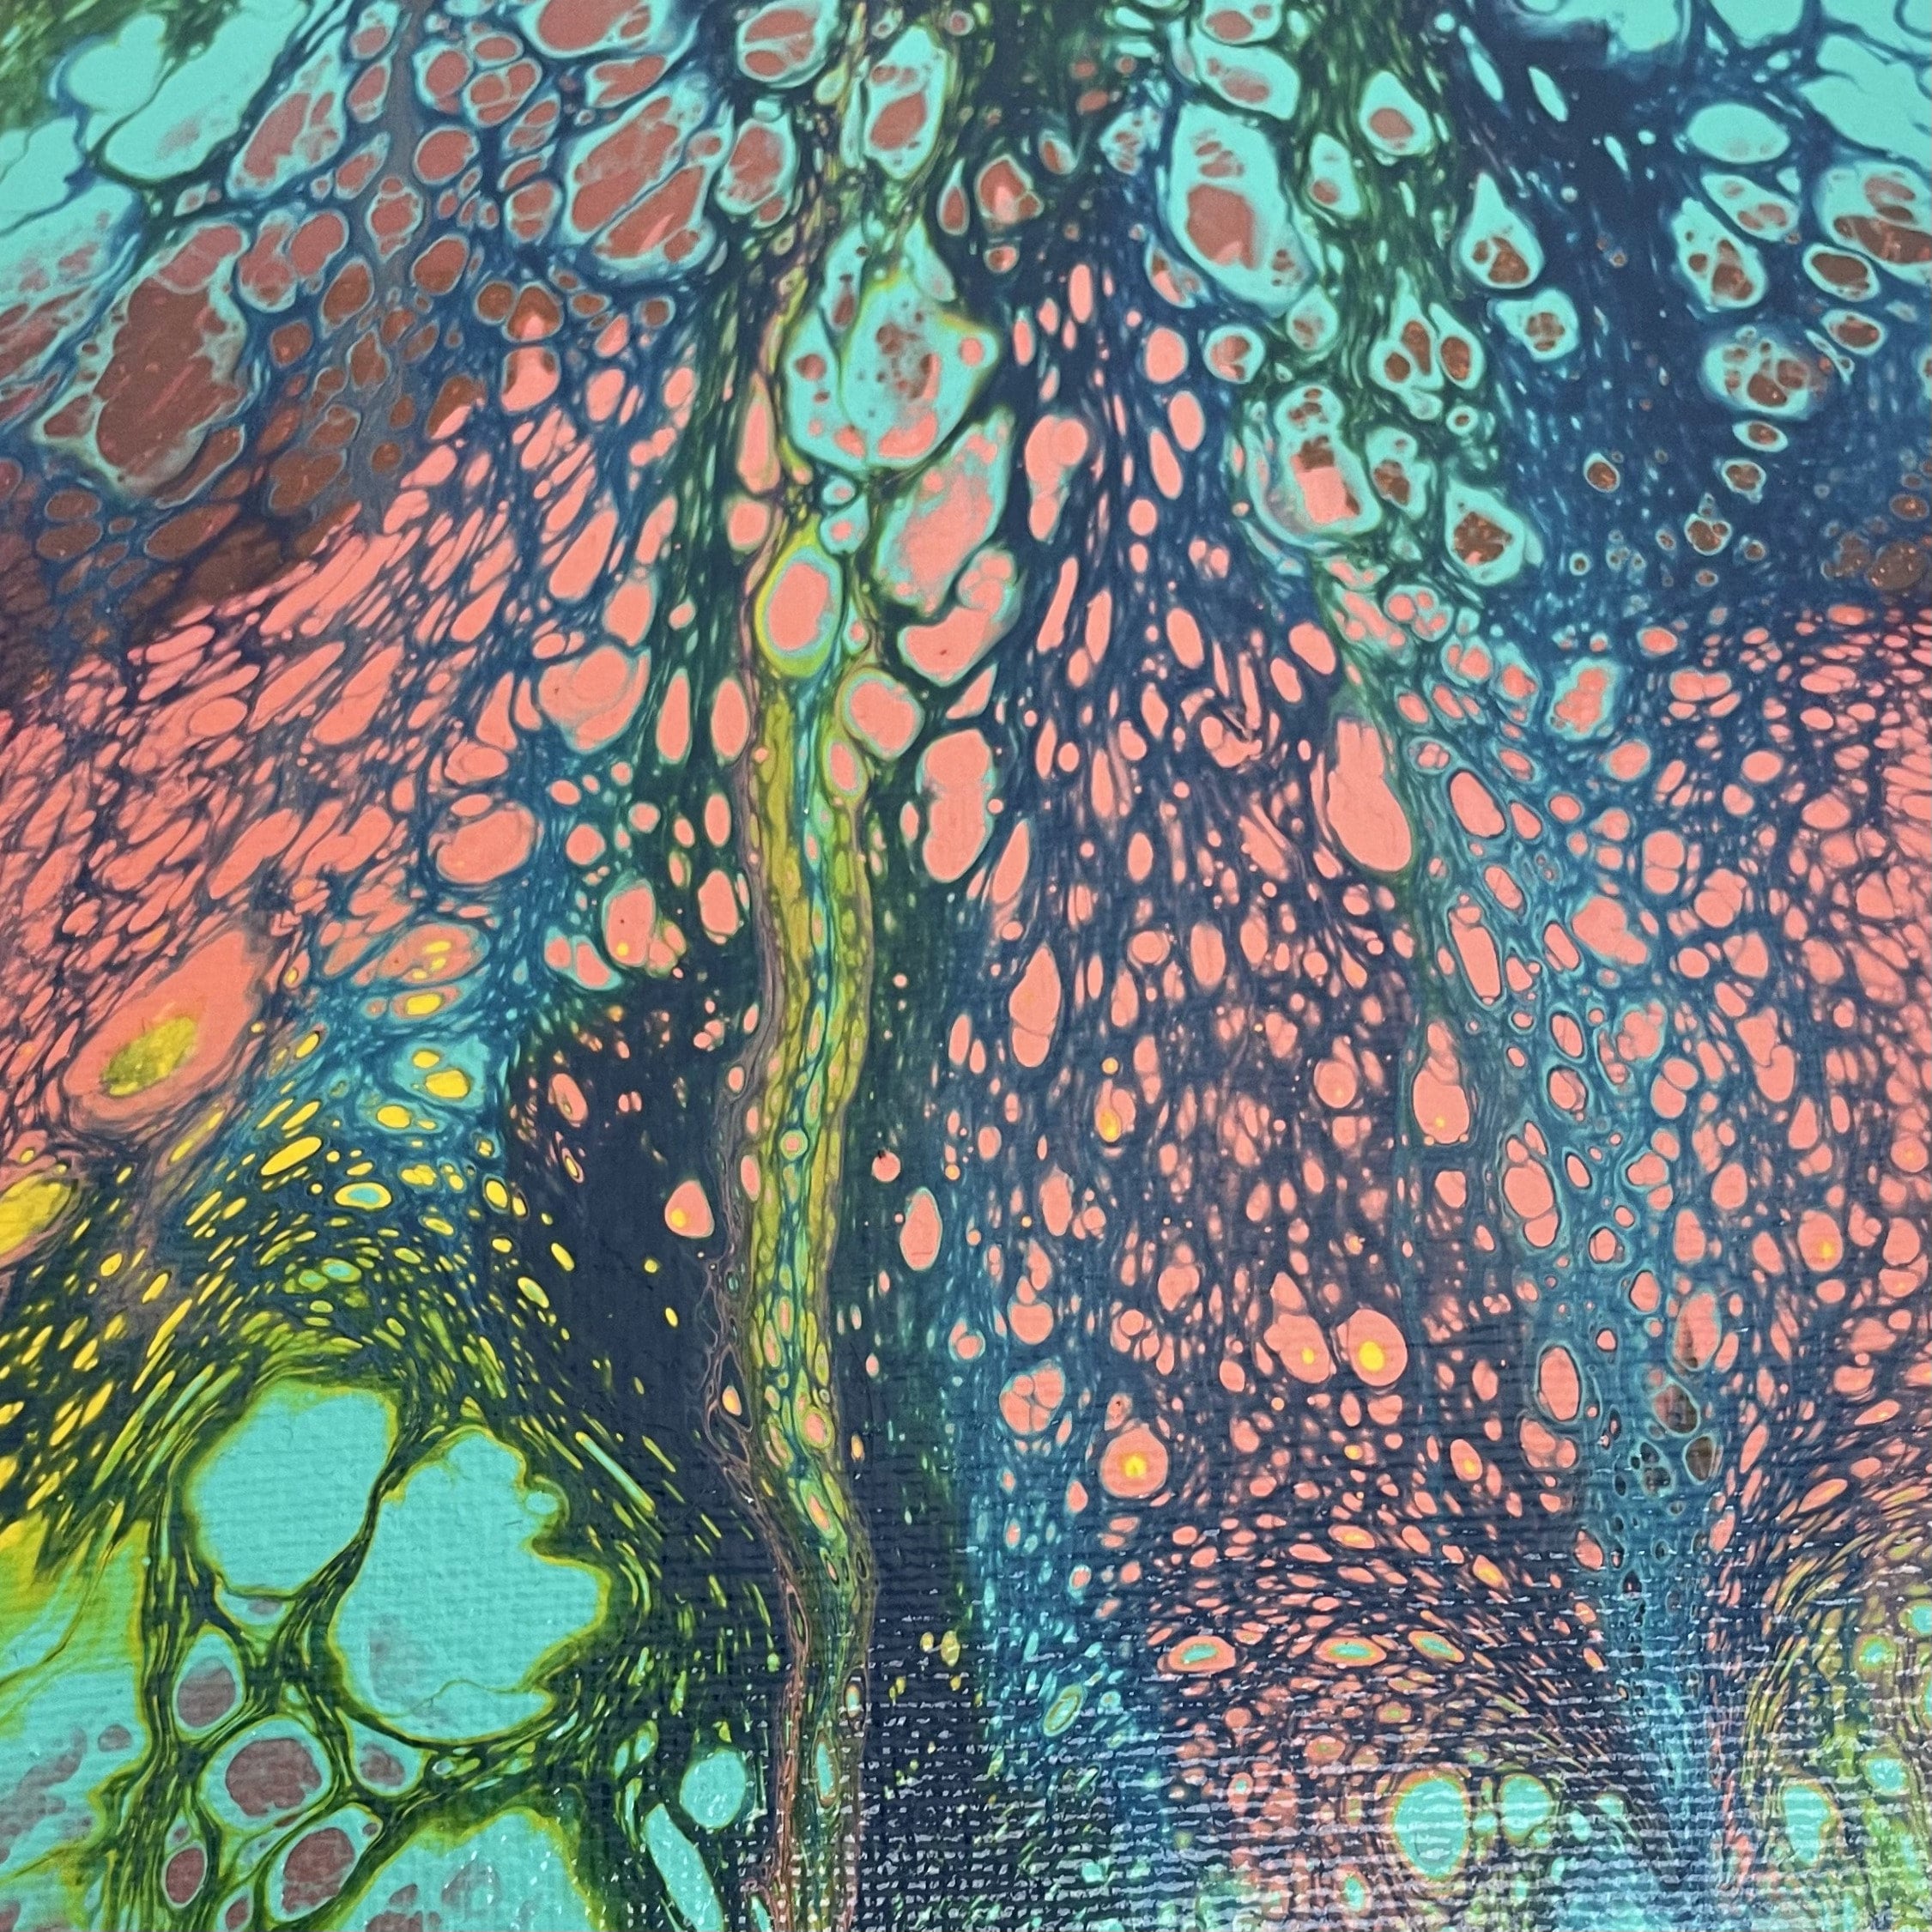 Green and yellow pour paint